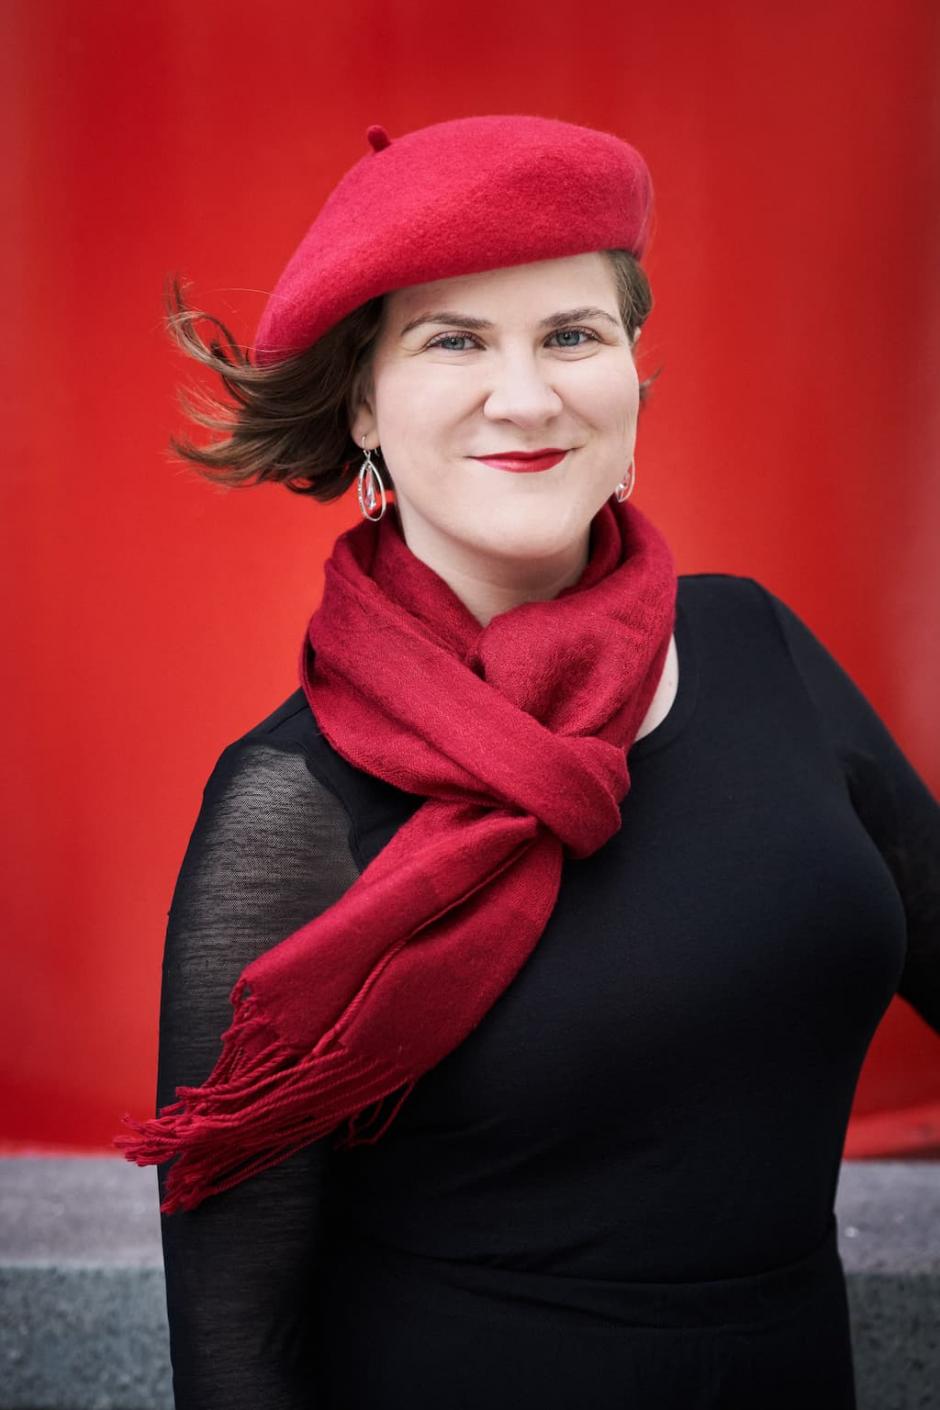 Ema Nikolovska is wearing a black top, red scarf and red beret, and smiling at the camera